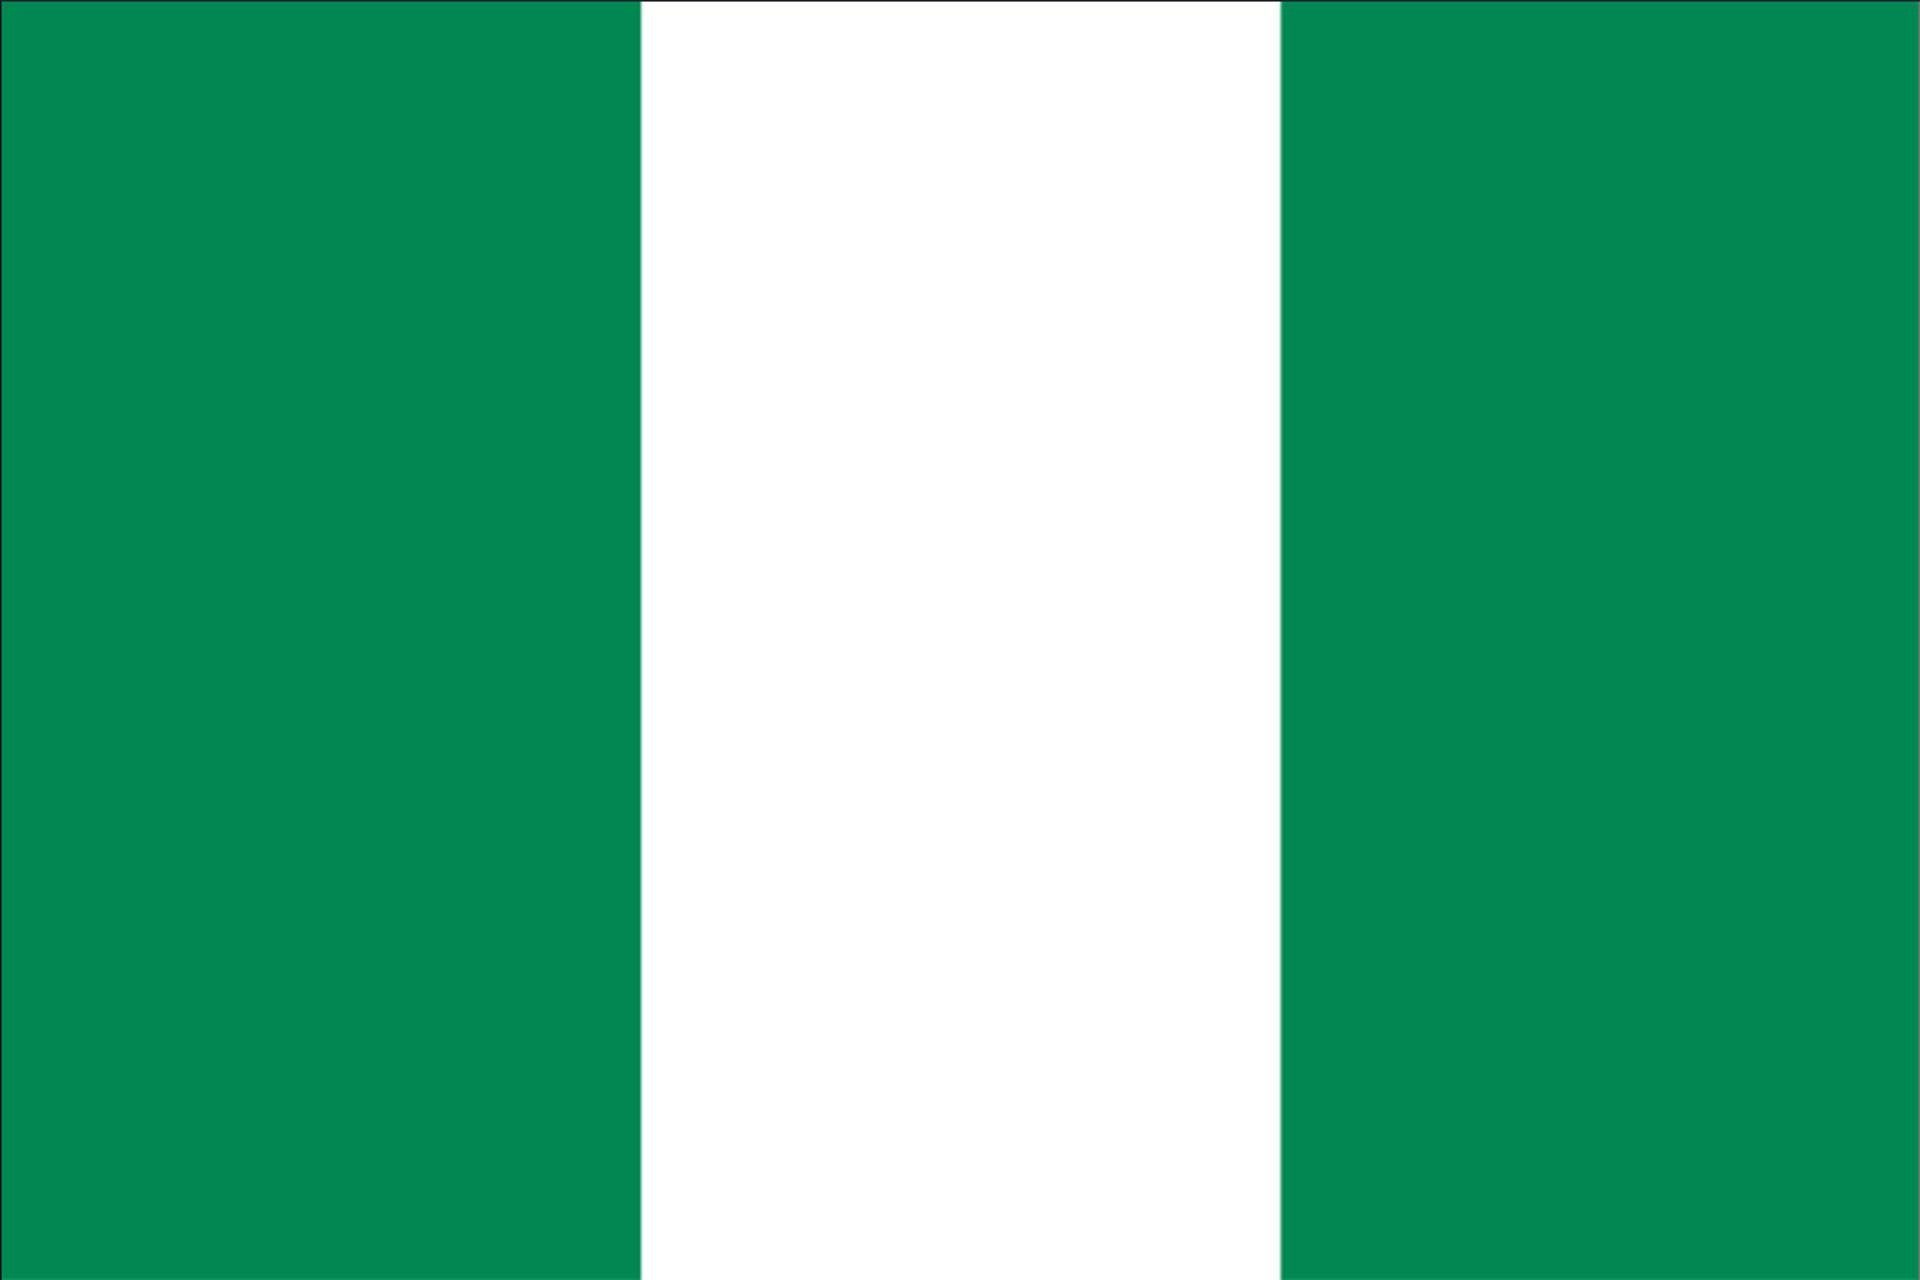 flaggenmeer Flagge Flagge Nigeria 110 g/m² Querformat